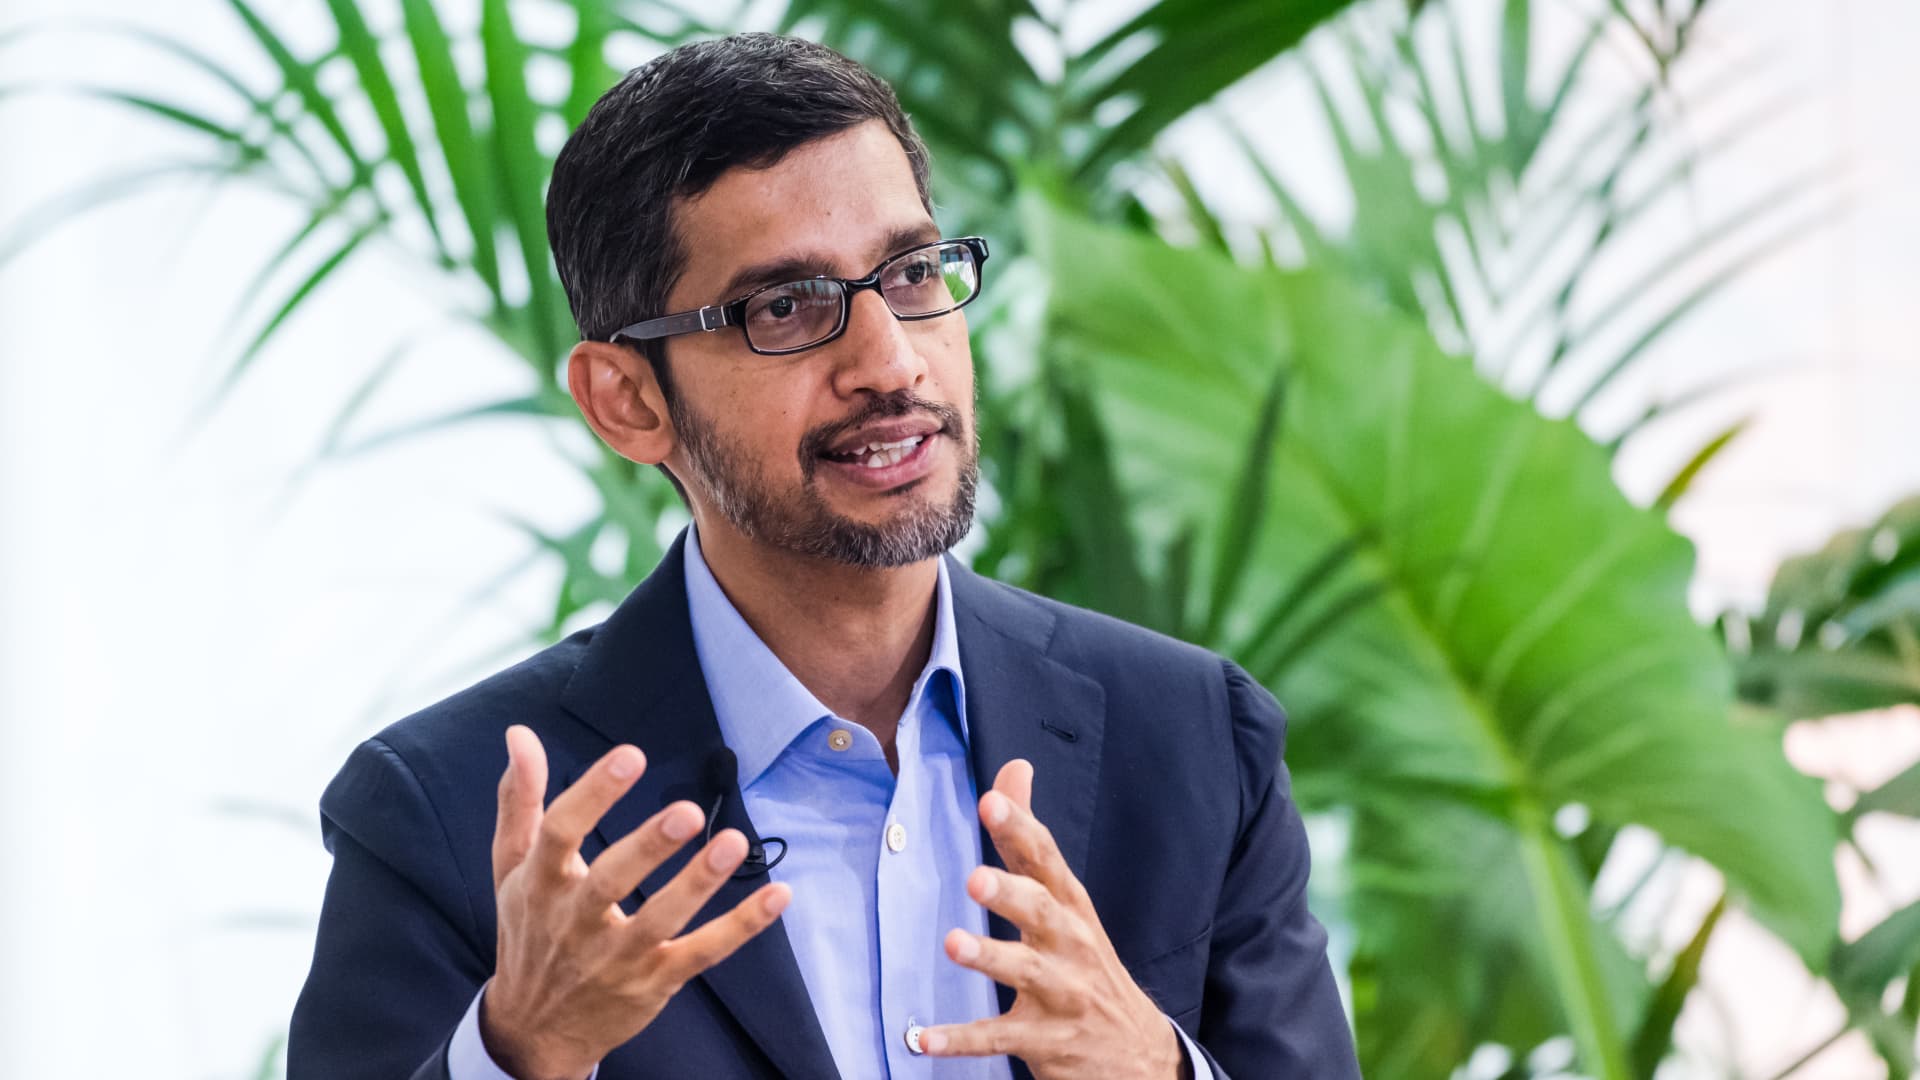 Sundar Pichai, chief executive officer of Alphabet Inc., gestures while speaking during a discussion on artificial intelligence at the Bruegel European economic think tank in Brussels, Belgium, on Monday, Jan. 20, 2020. Pichai urged the U.S. and European Union to coordinate regulatory approaches on artificial intelligence, calling their alignment critical.